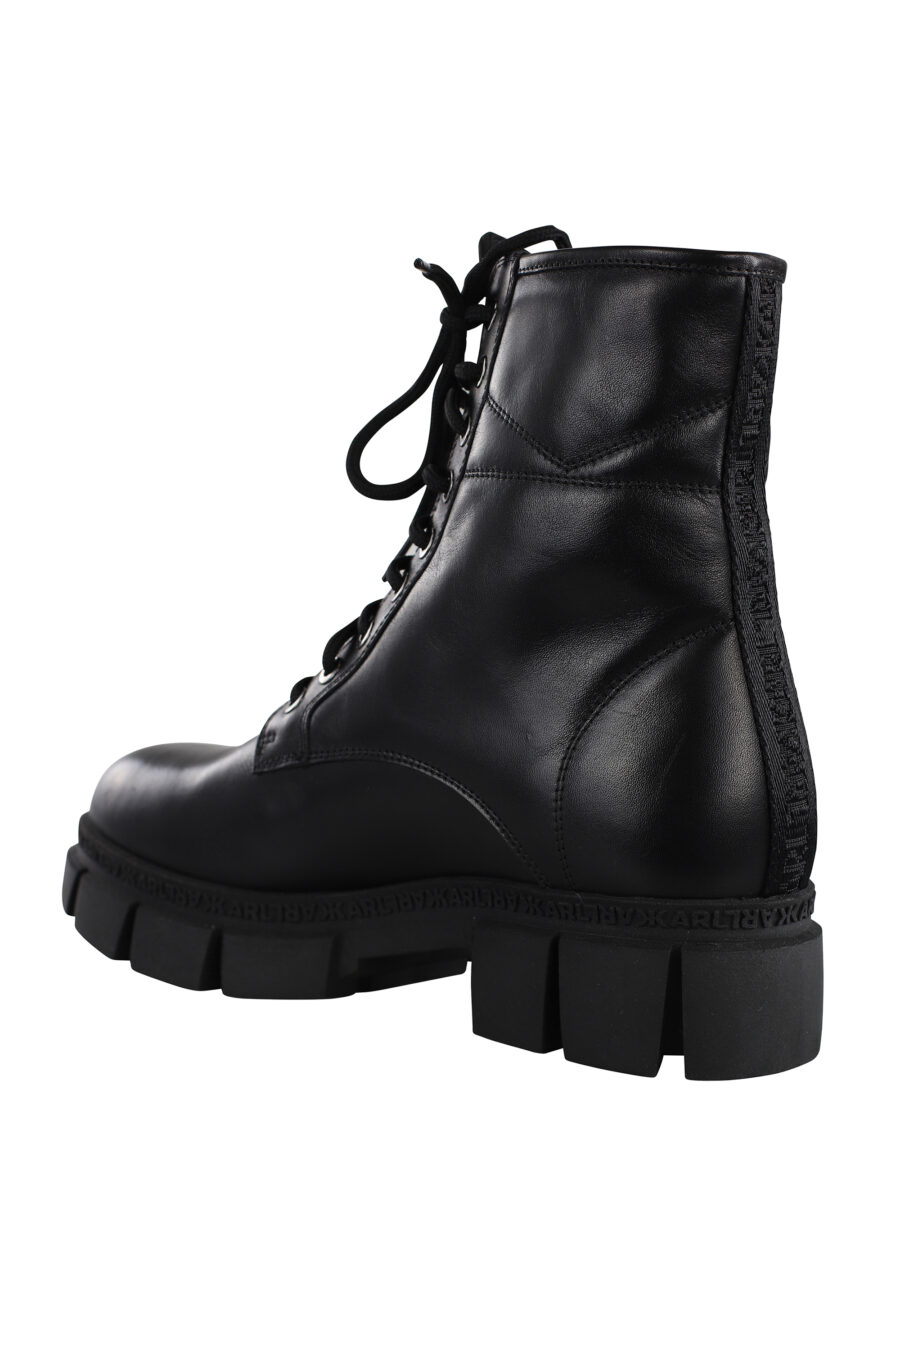 Black lace-up ankle boots with small white logo - IMG 7115